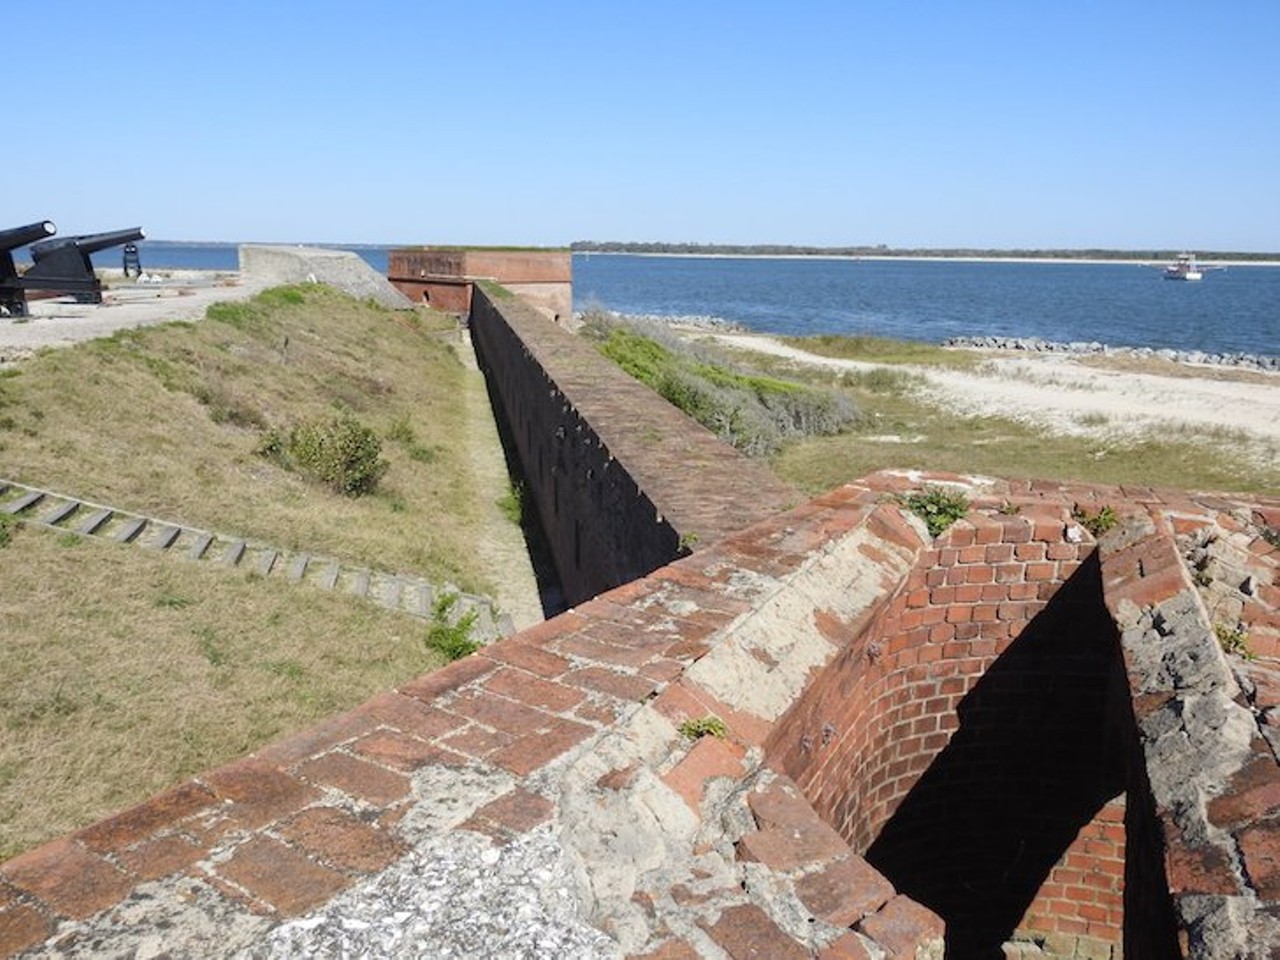 Fort Clinch State Park
Estimated drive from Tampa: 4 hours
This state park has 69 full-facility campsites with beach areas and lush gardens. The most popular activity for campers here is to visit the historical site of the fort itself, but you can also visit a museum or go mountain biking.
Photo via Florida State Parks/Facebook